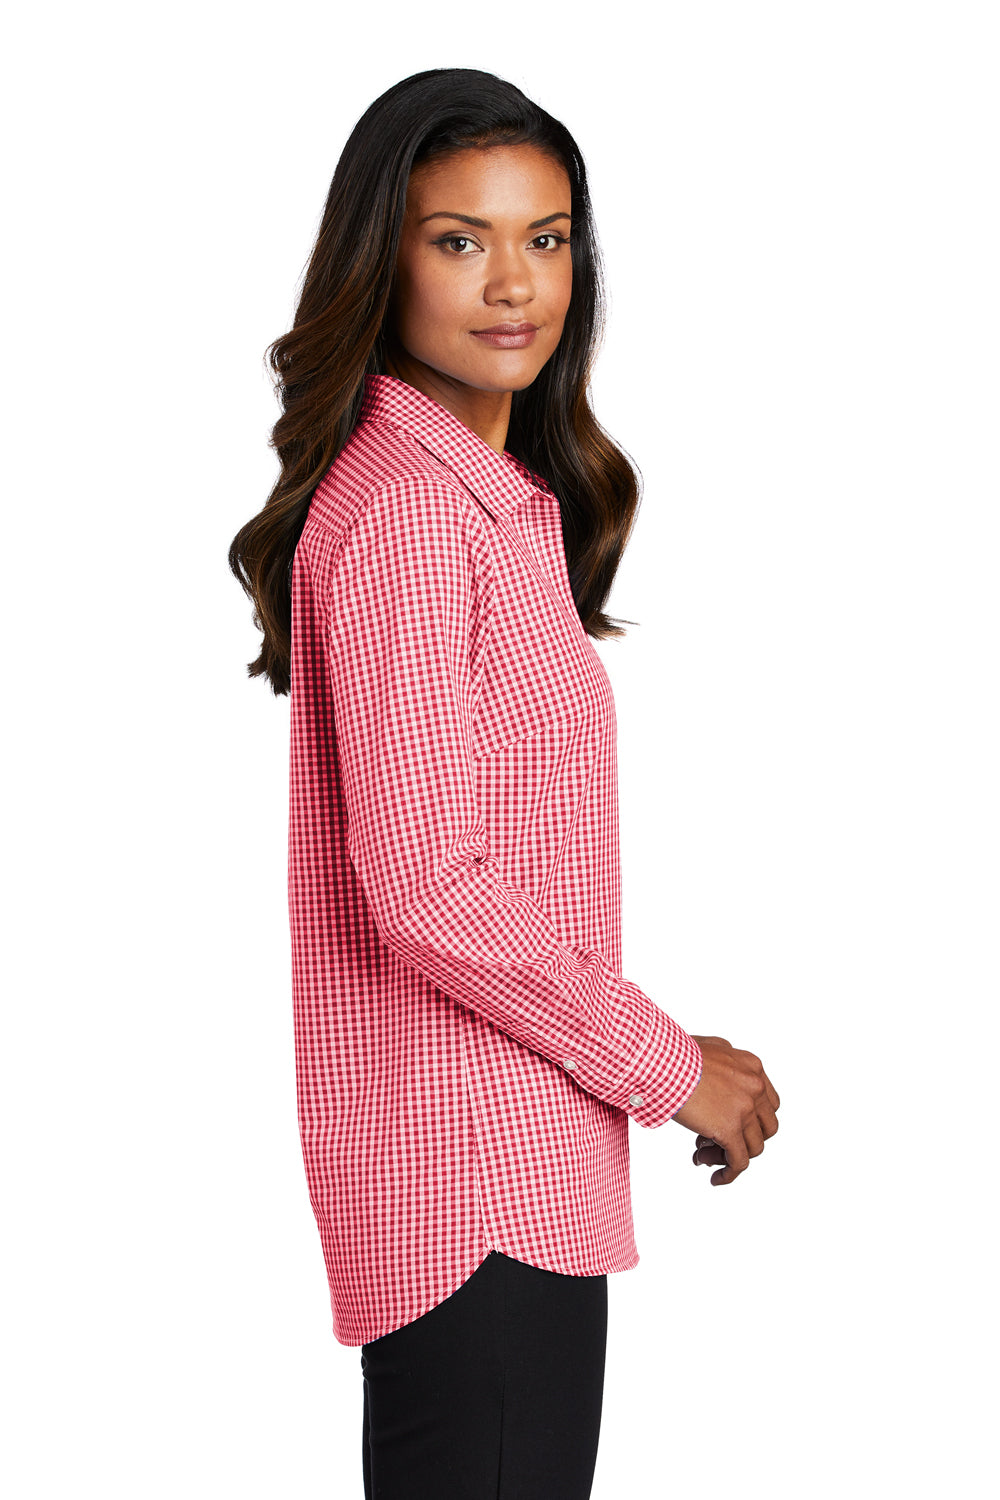 Port Authority Womens Broadcloth Gingham Long Sleeve Button Down Shirt Rich Red/White Side